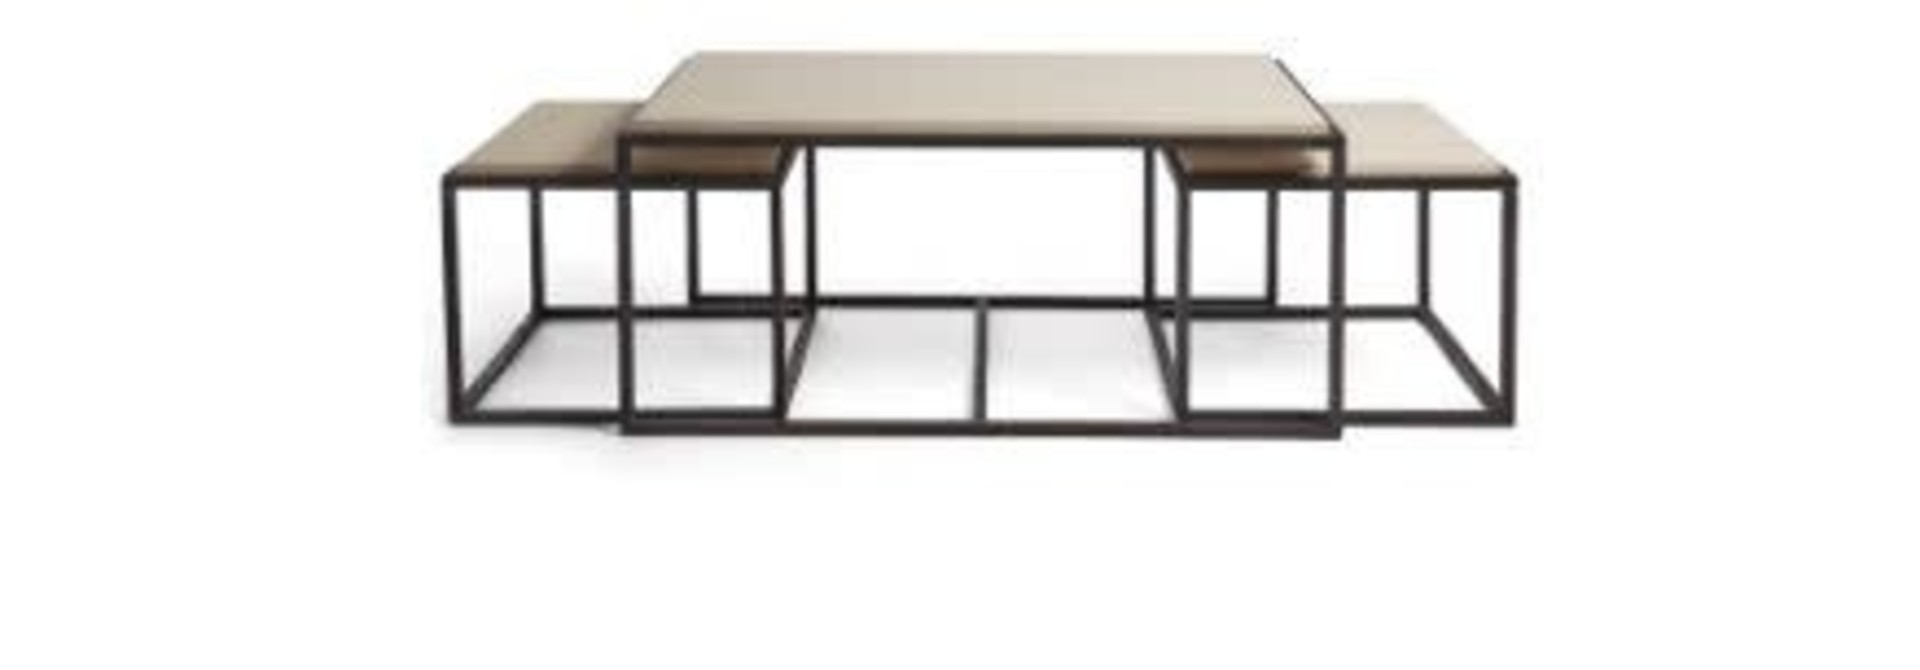 Triga Nesting | The Cocktail Table Collection - 42 Inch x 24 Inch x 18 Inch